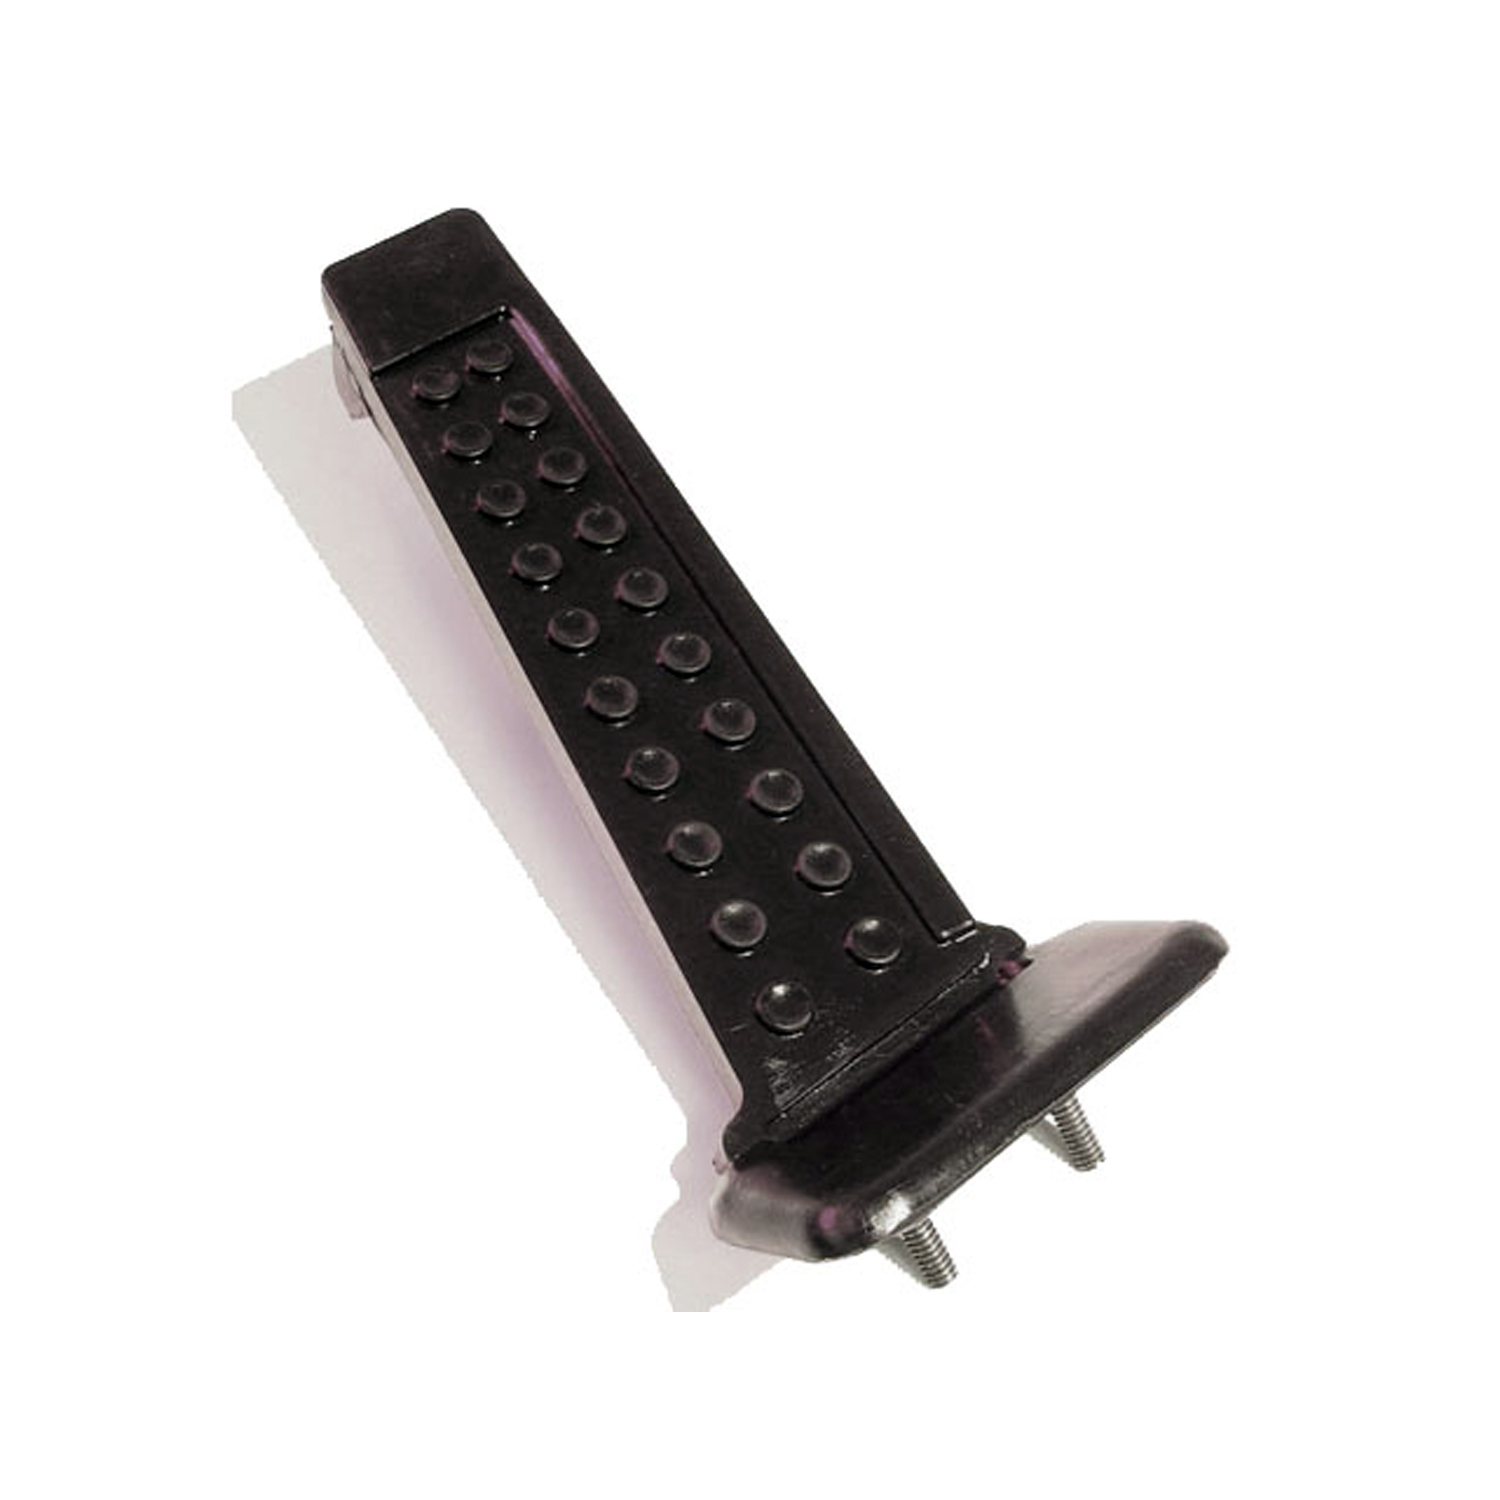 1965 Dodge Coronet Accelerator Pedal Pad.  Made with steel cores and studs-AP 25-D